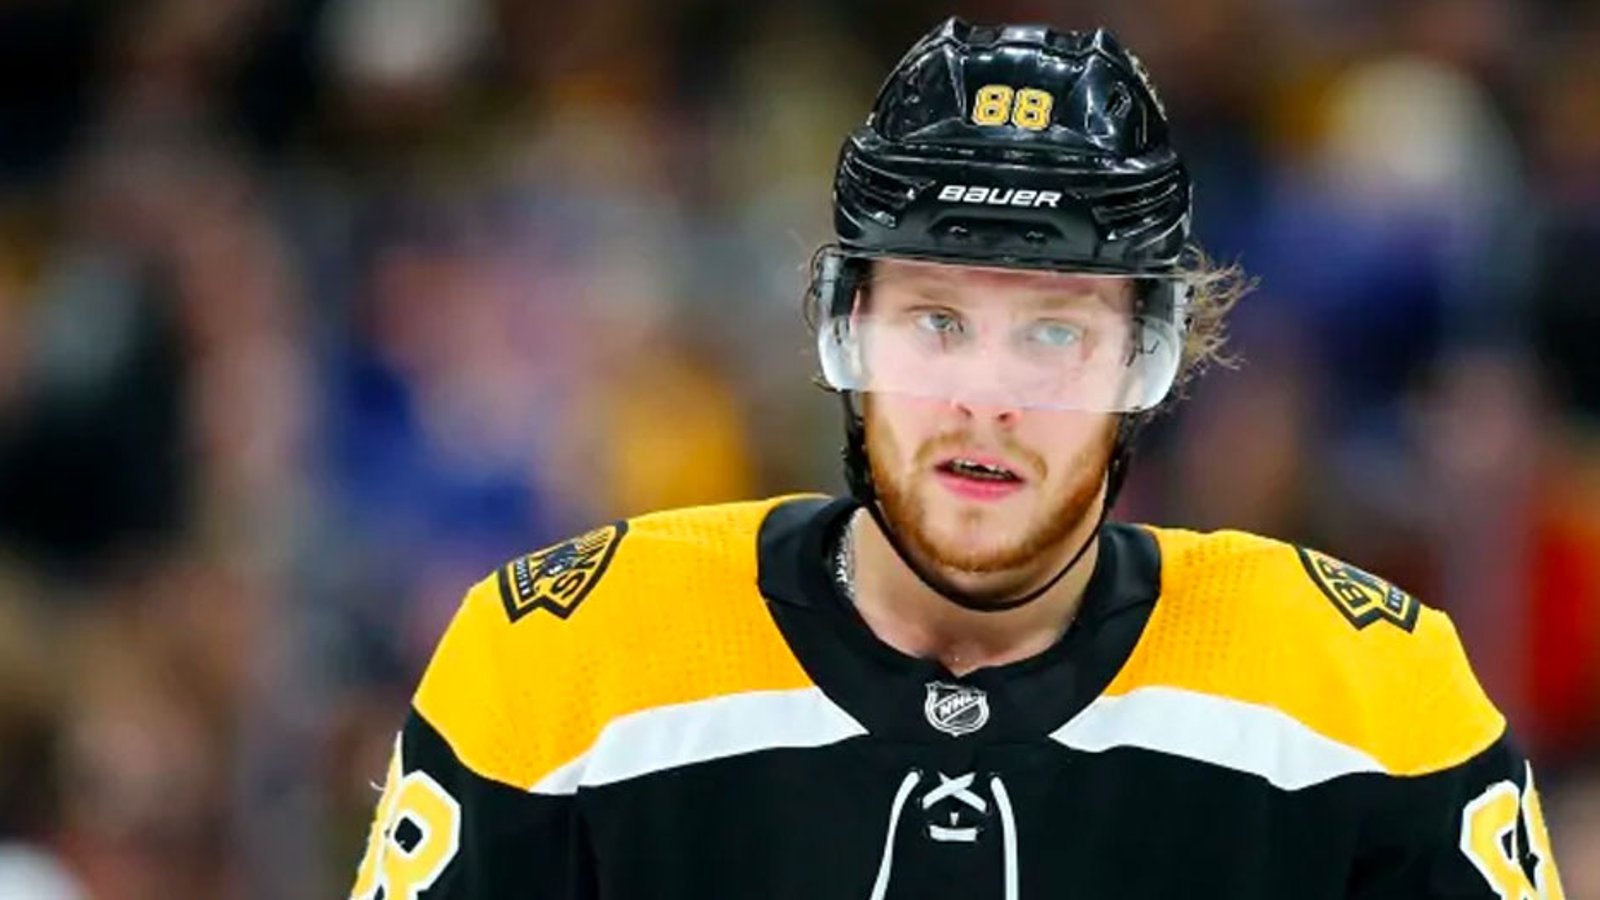 Two Bruins, including Pastrnak, deemed “unfit” to take part in practice! 